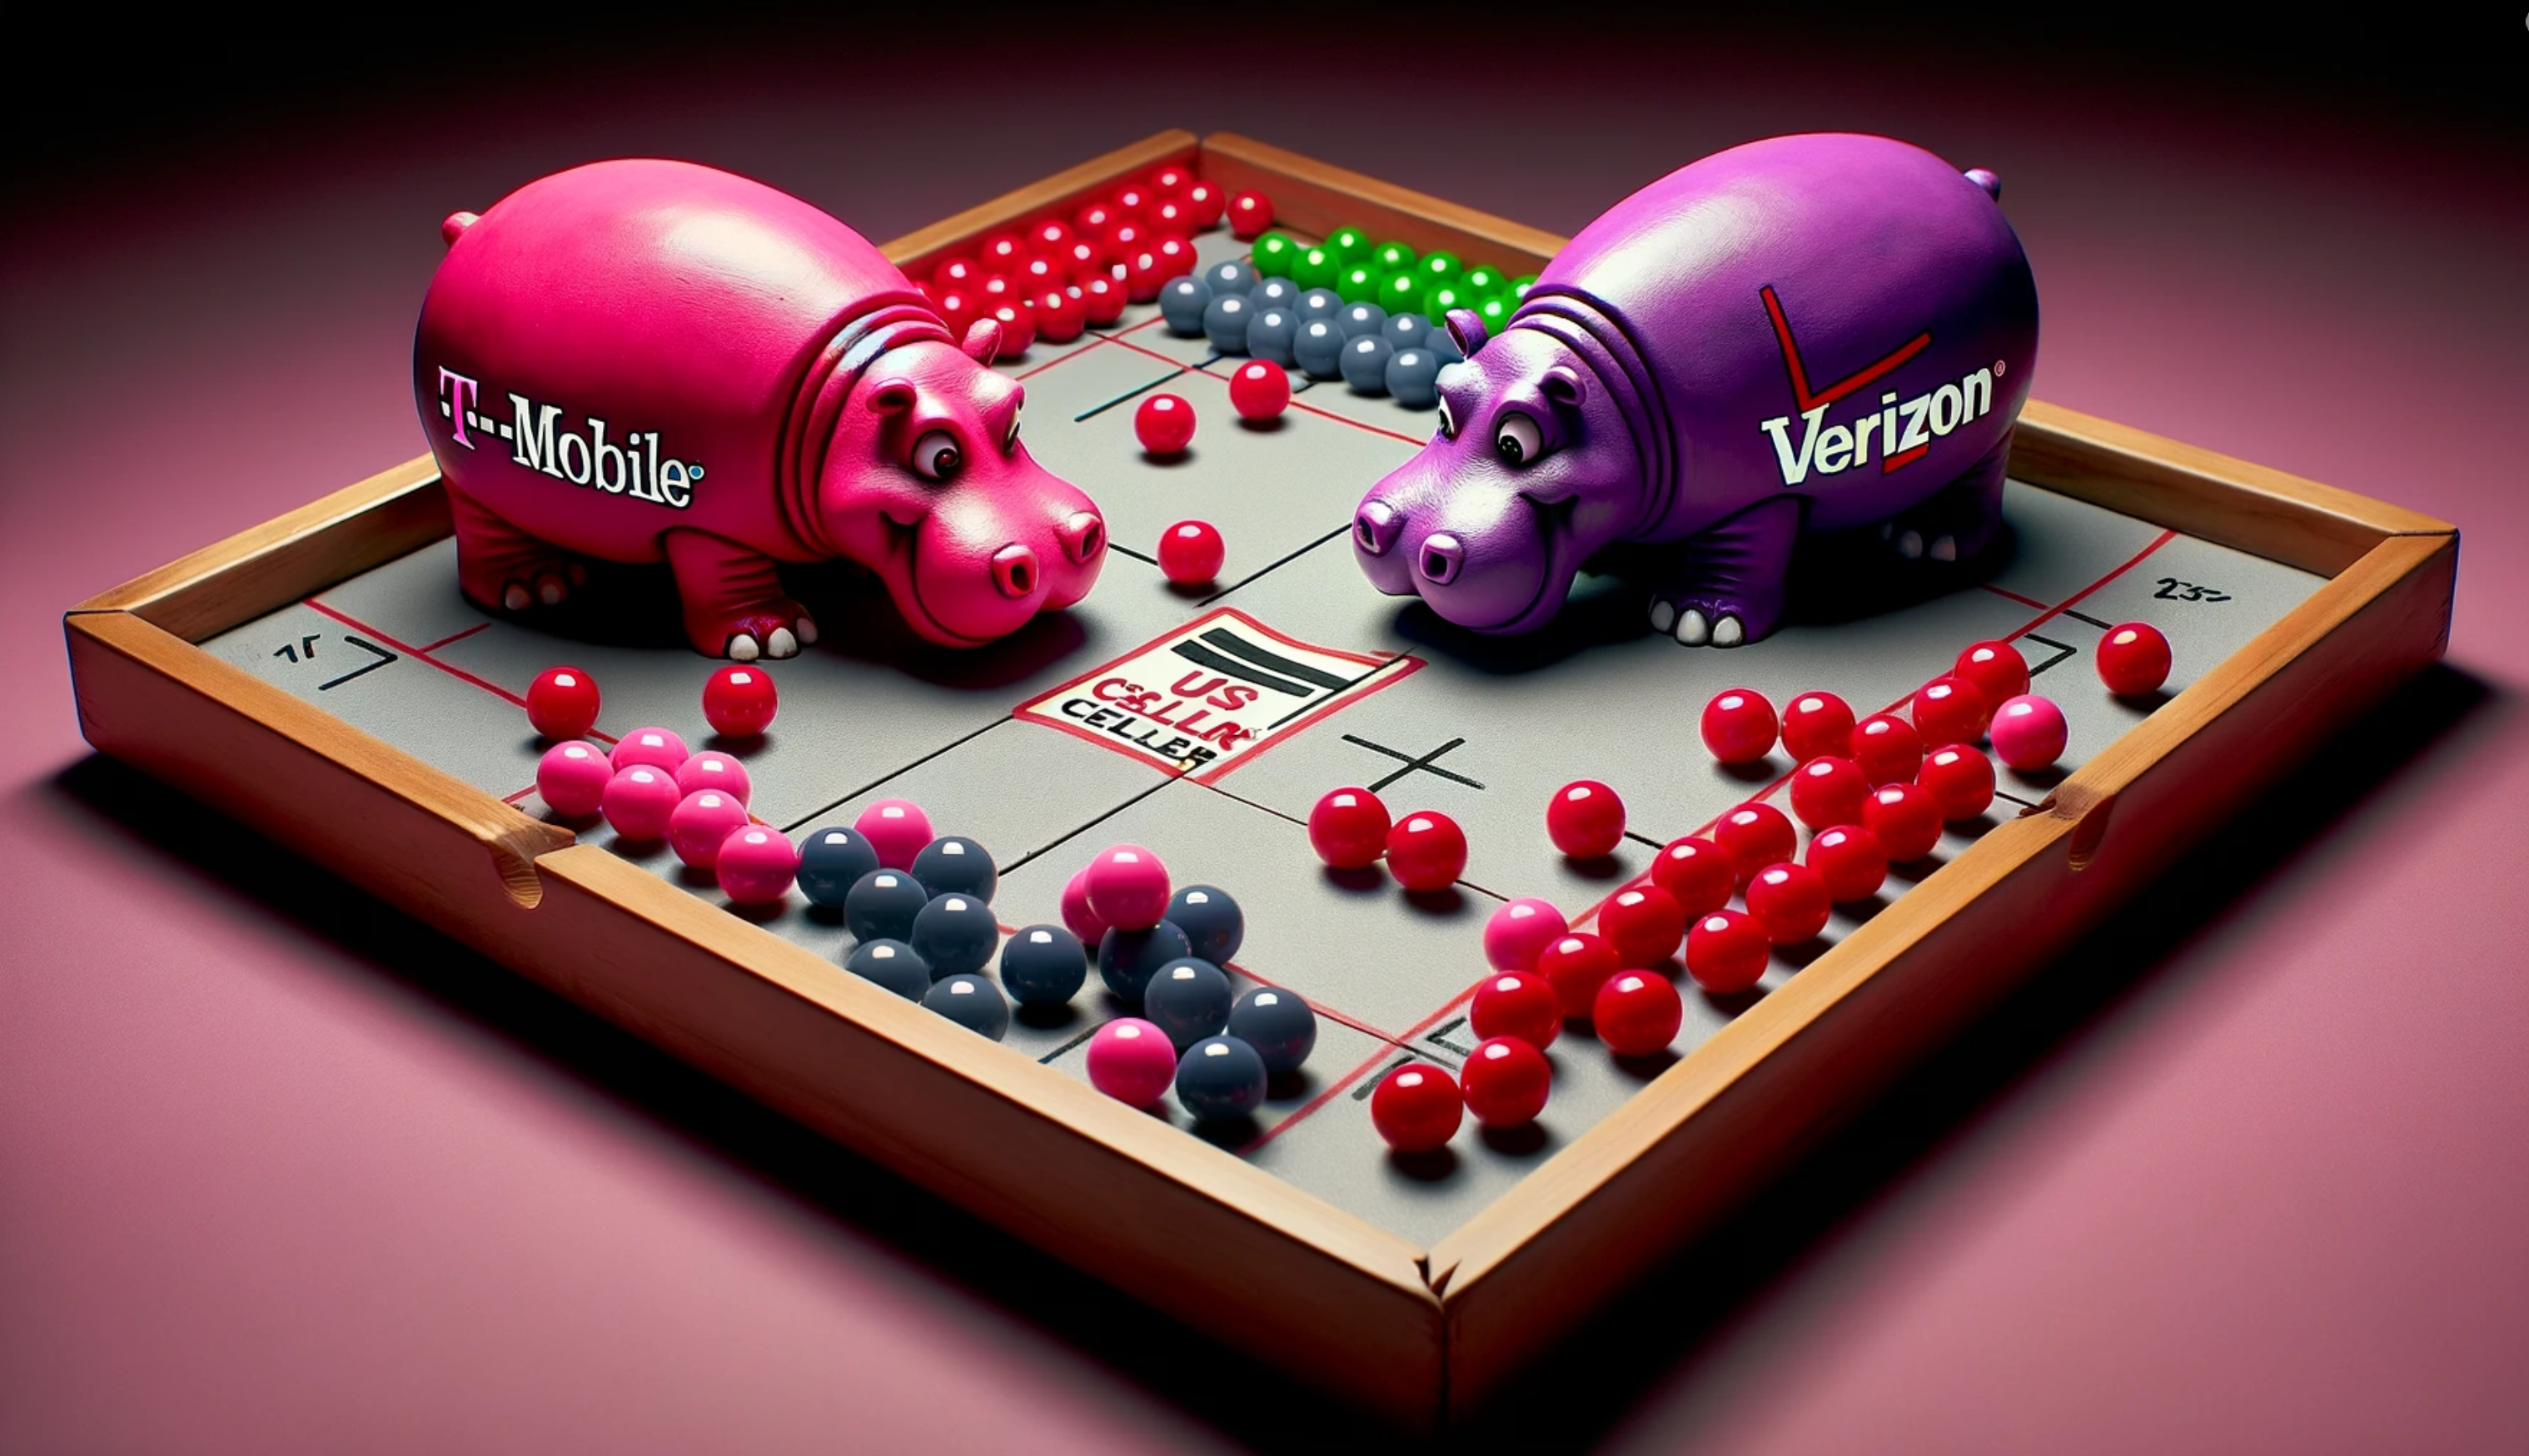 Parody image of T-Mobile and Verizon acquiring US Cellular marbles.